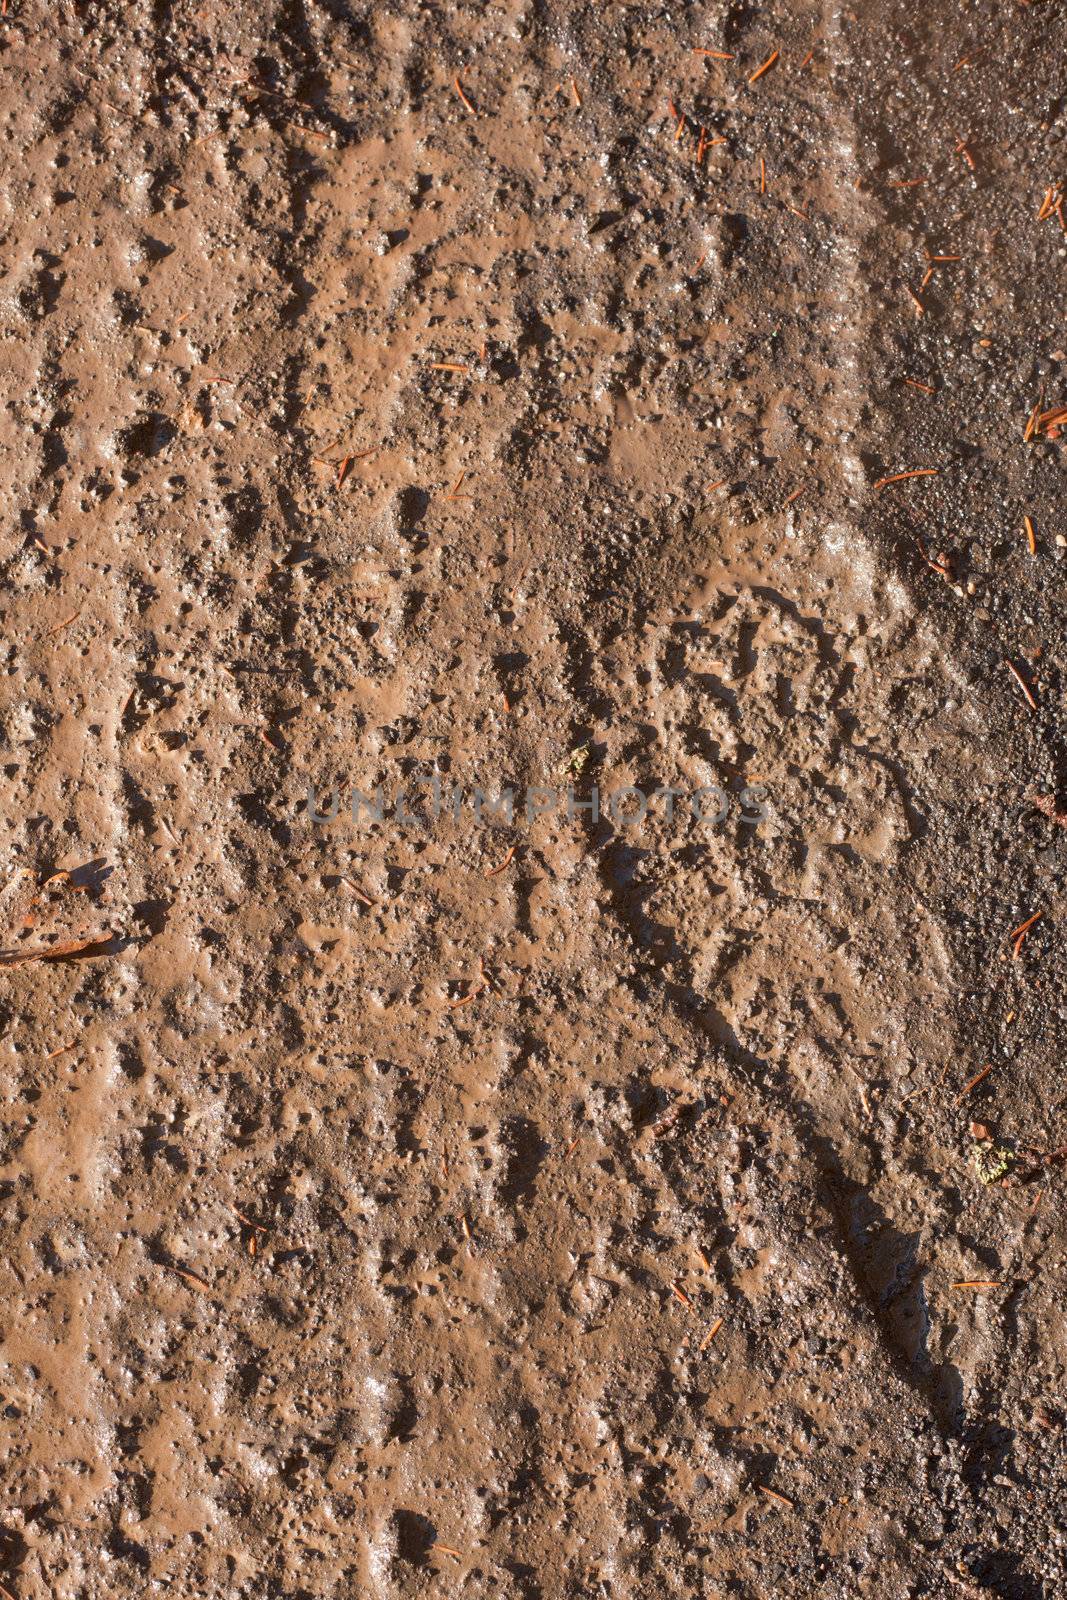 Imprints of car tire and boot tread in soft muddy ground.